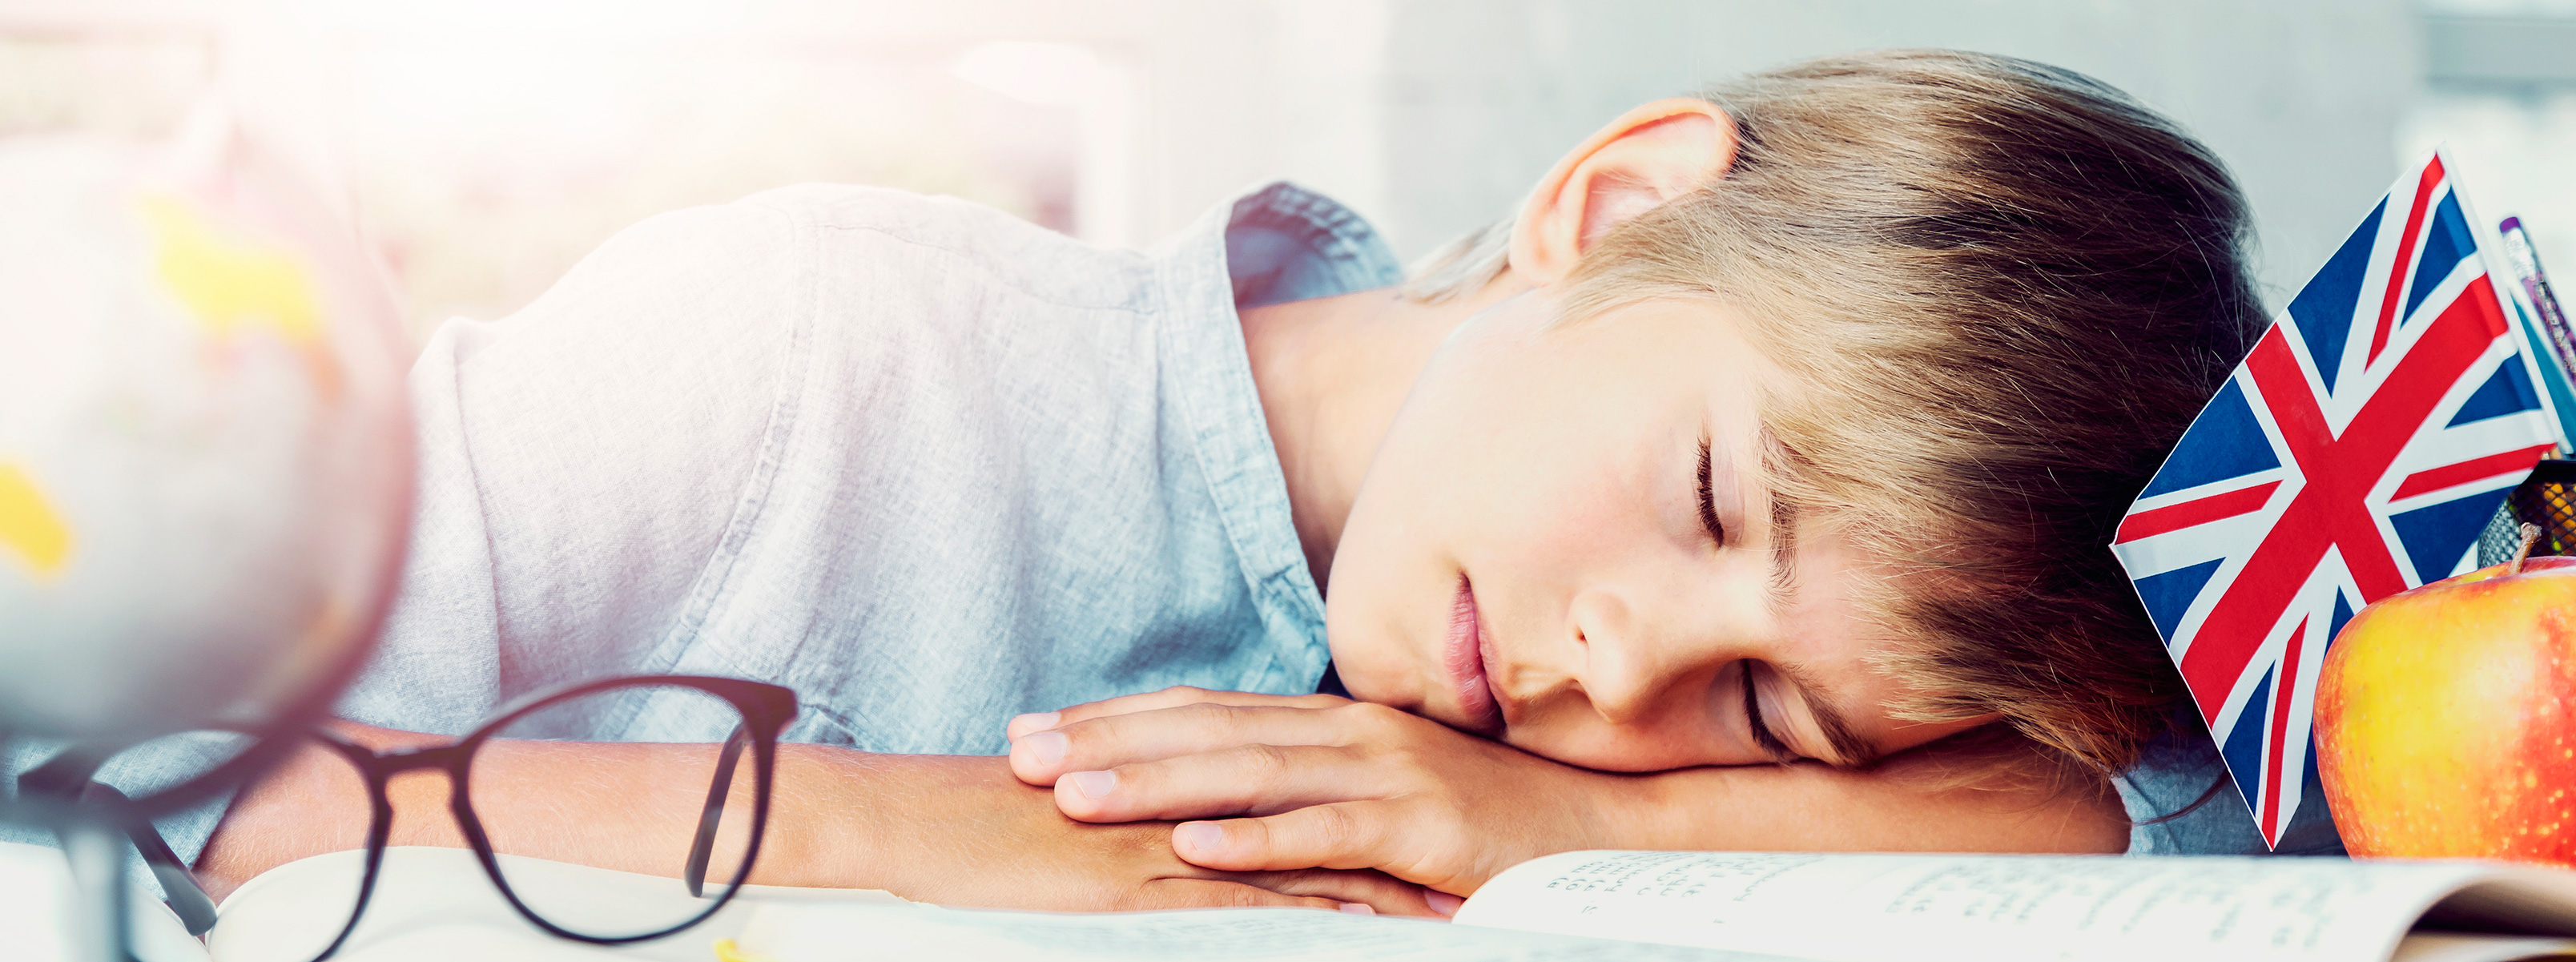 How much does your kid sleep?